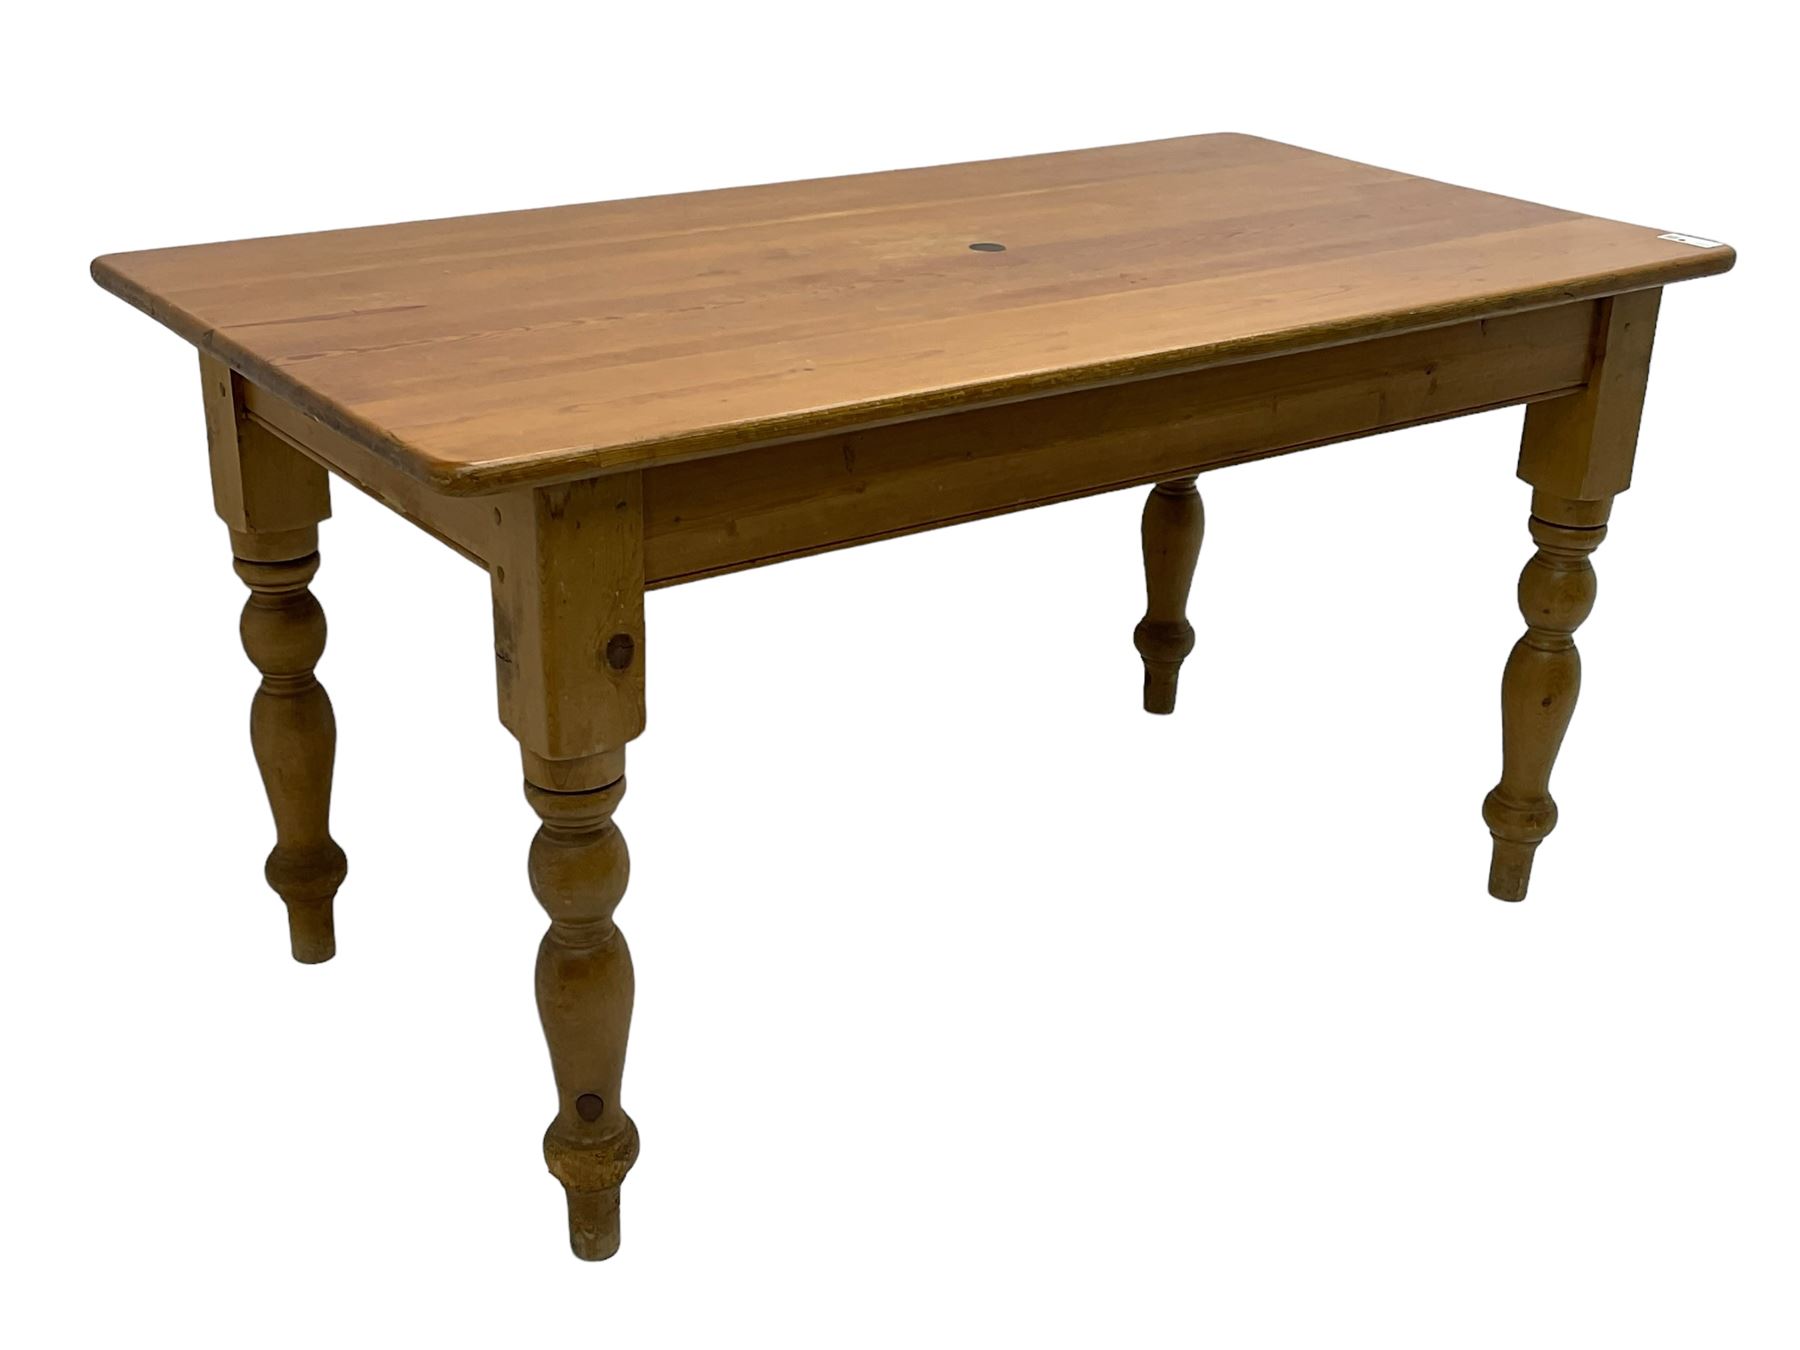 Polished pine farmhouse design dining table - Image 3 of 6